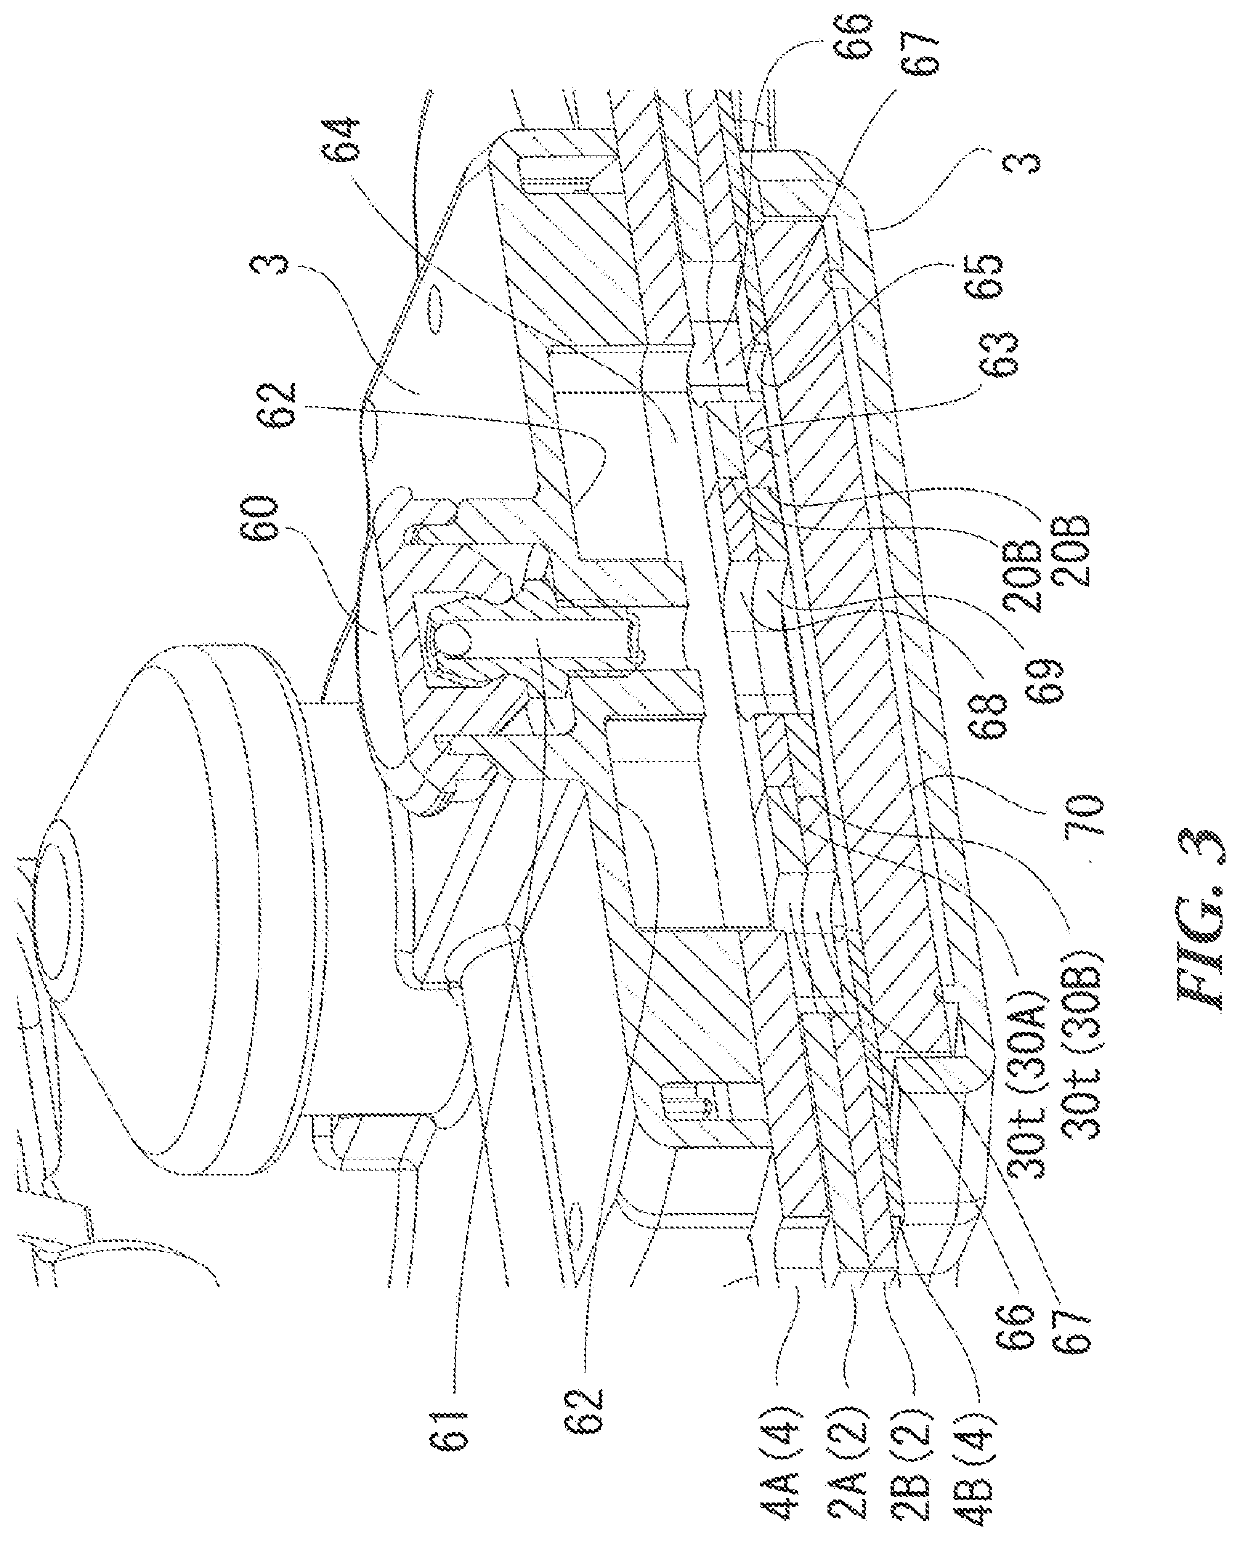 Reciprocating cutting blade apparatus and brush cutter